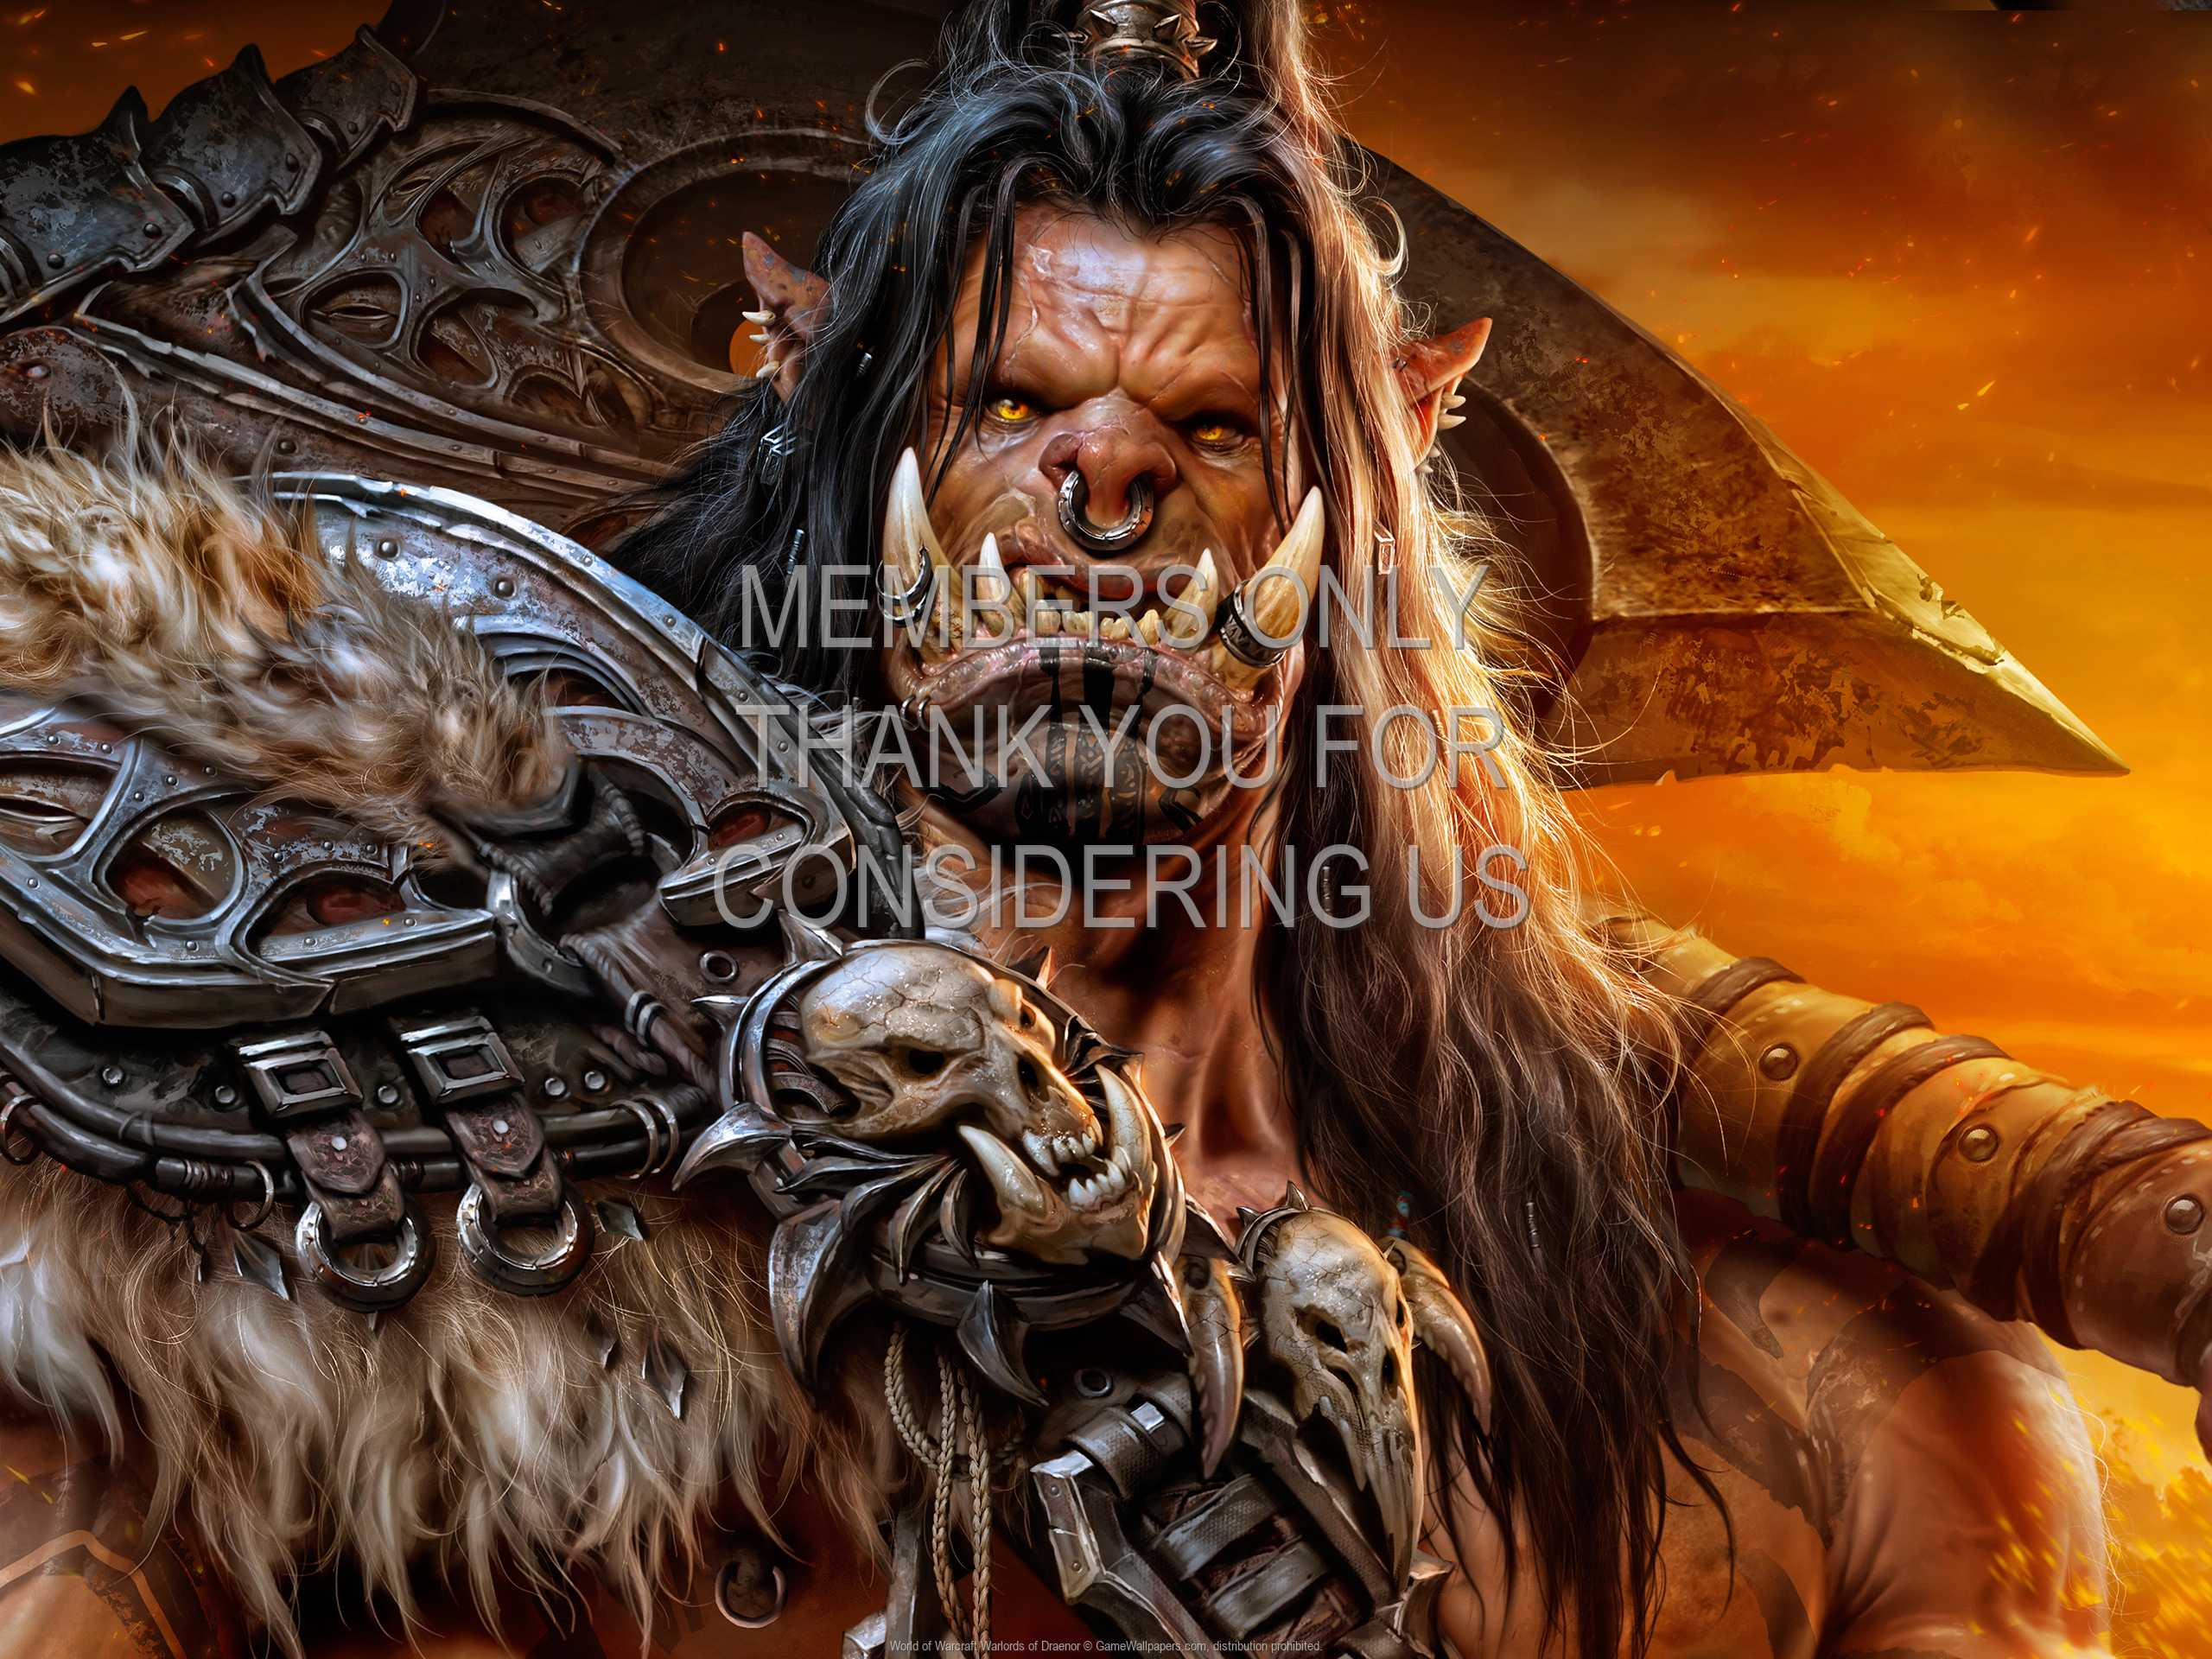 World of Warcraft: Warlords of Draenor 1080p Horizontal Mobile fond d'cran 04